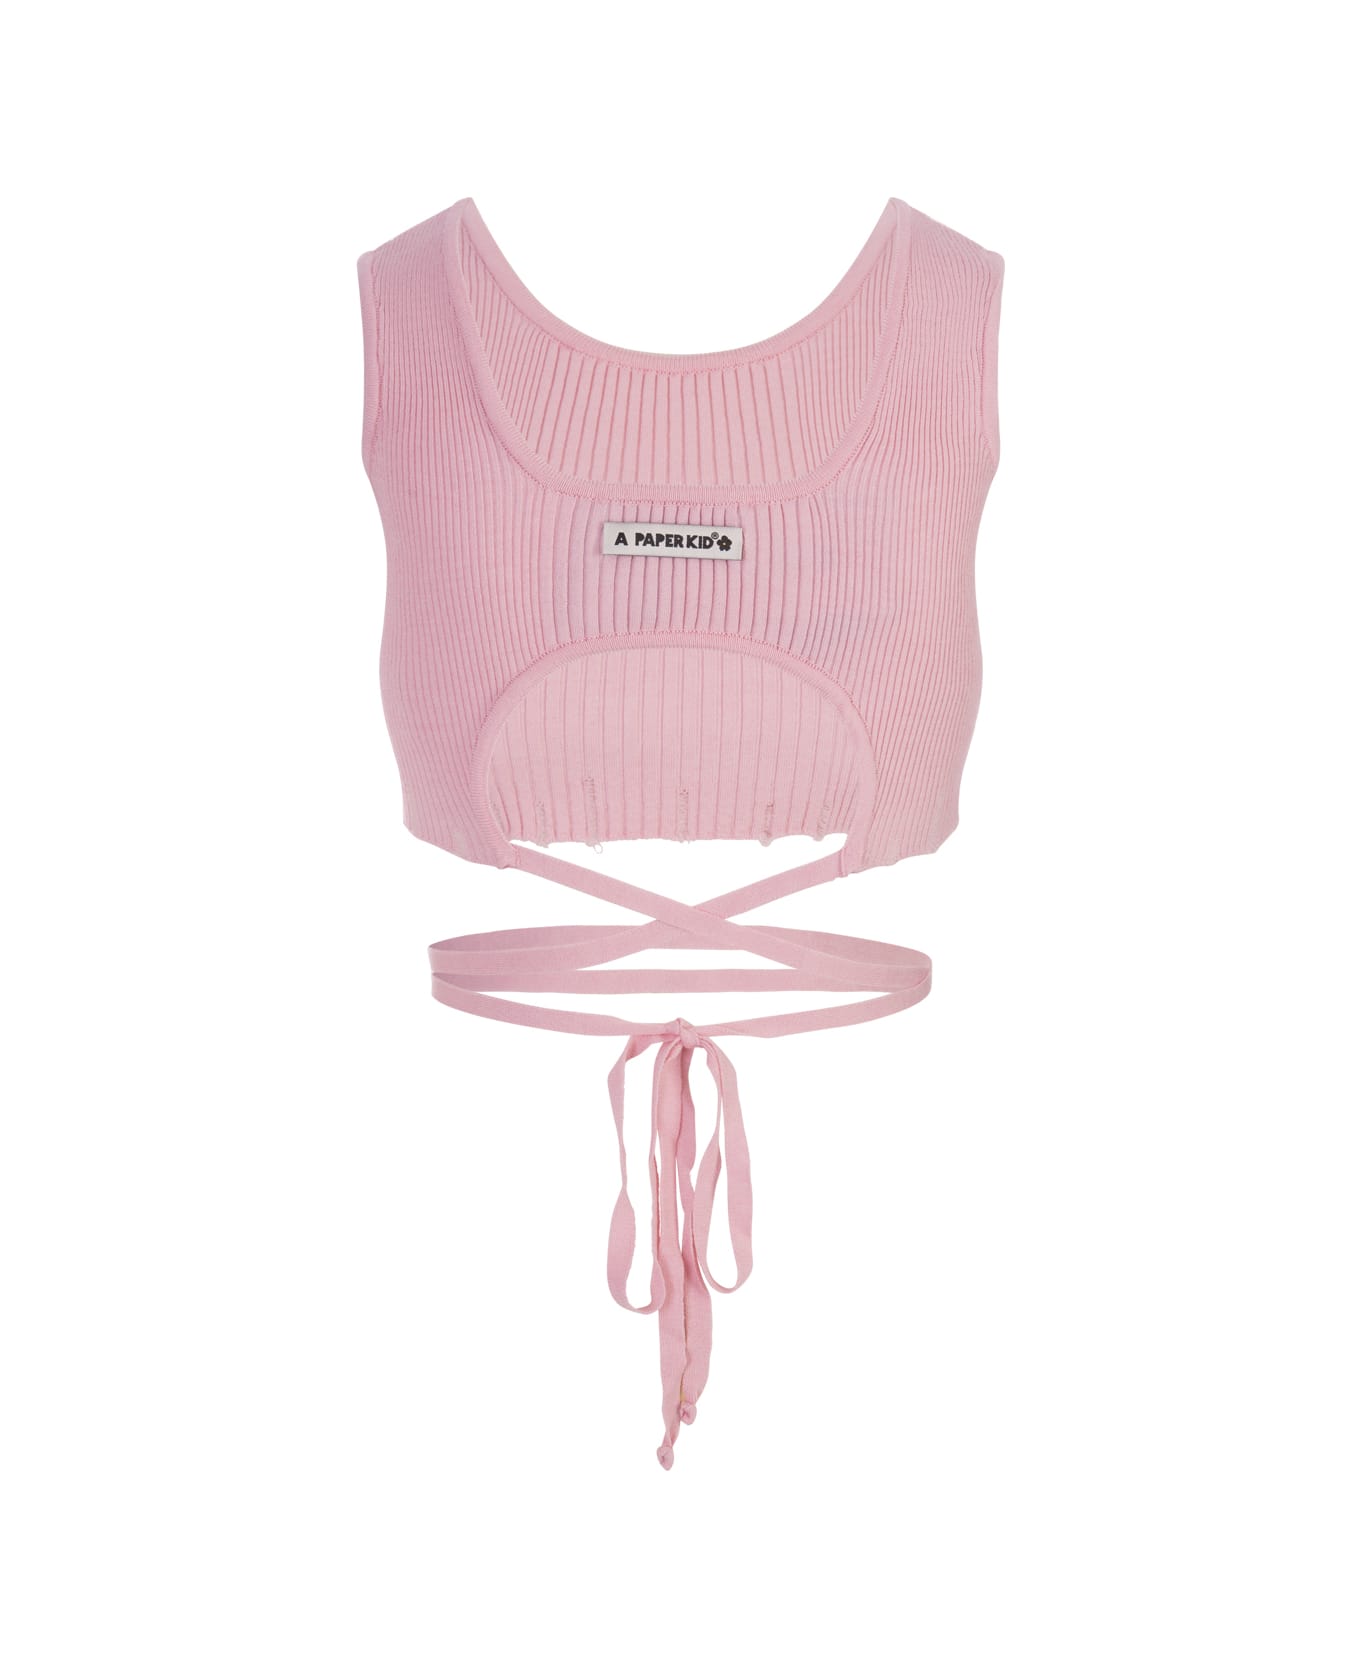 A Paper Kid Pink Ribbed Knit Crop Top With Distressed Effect